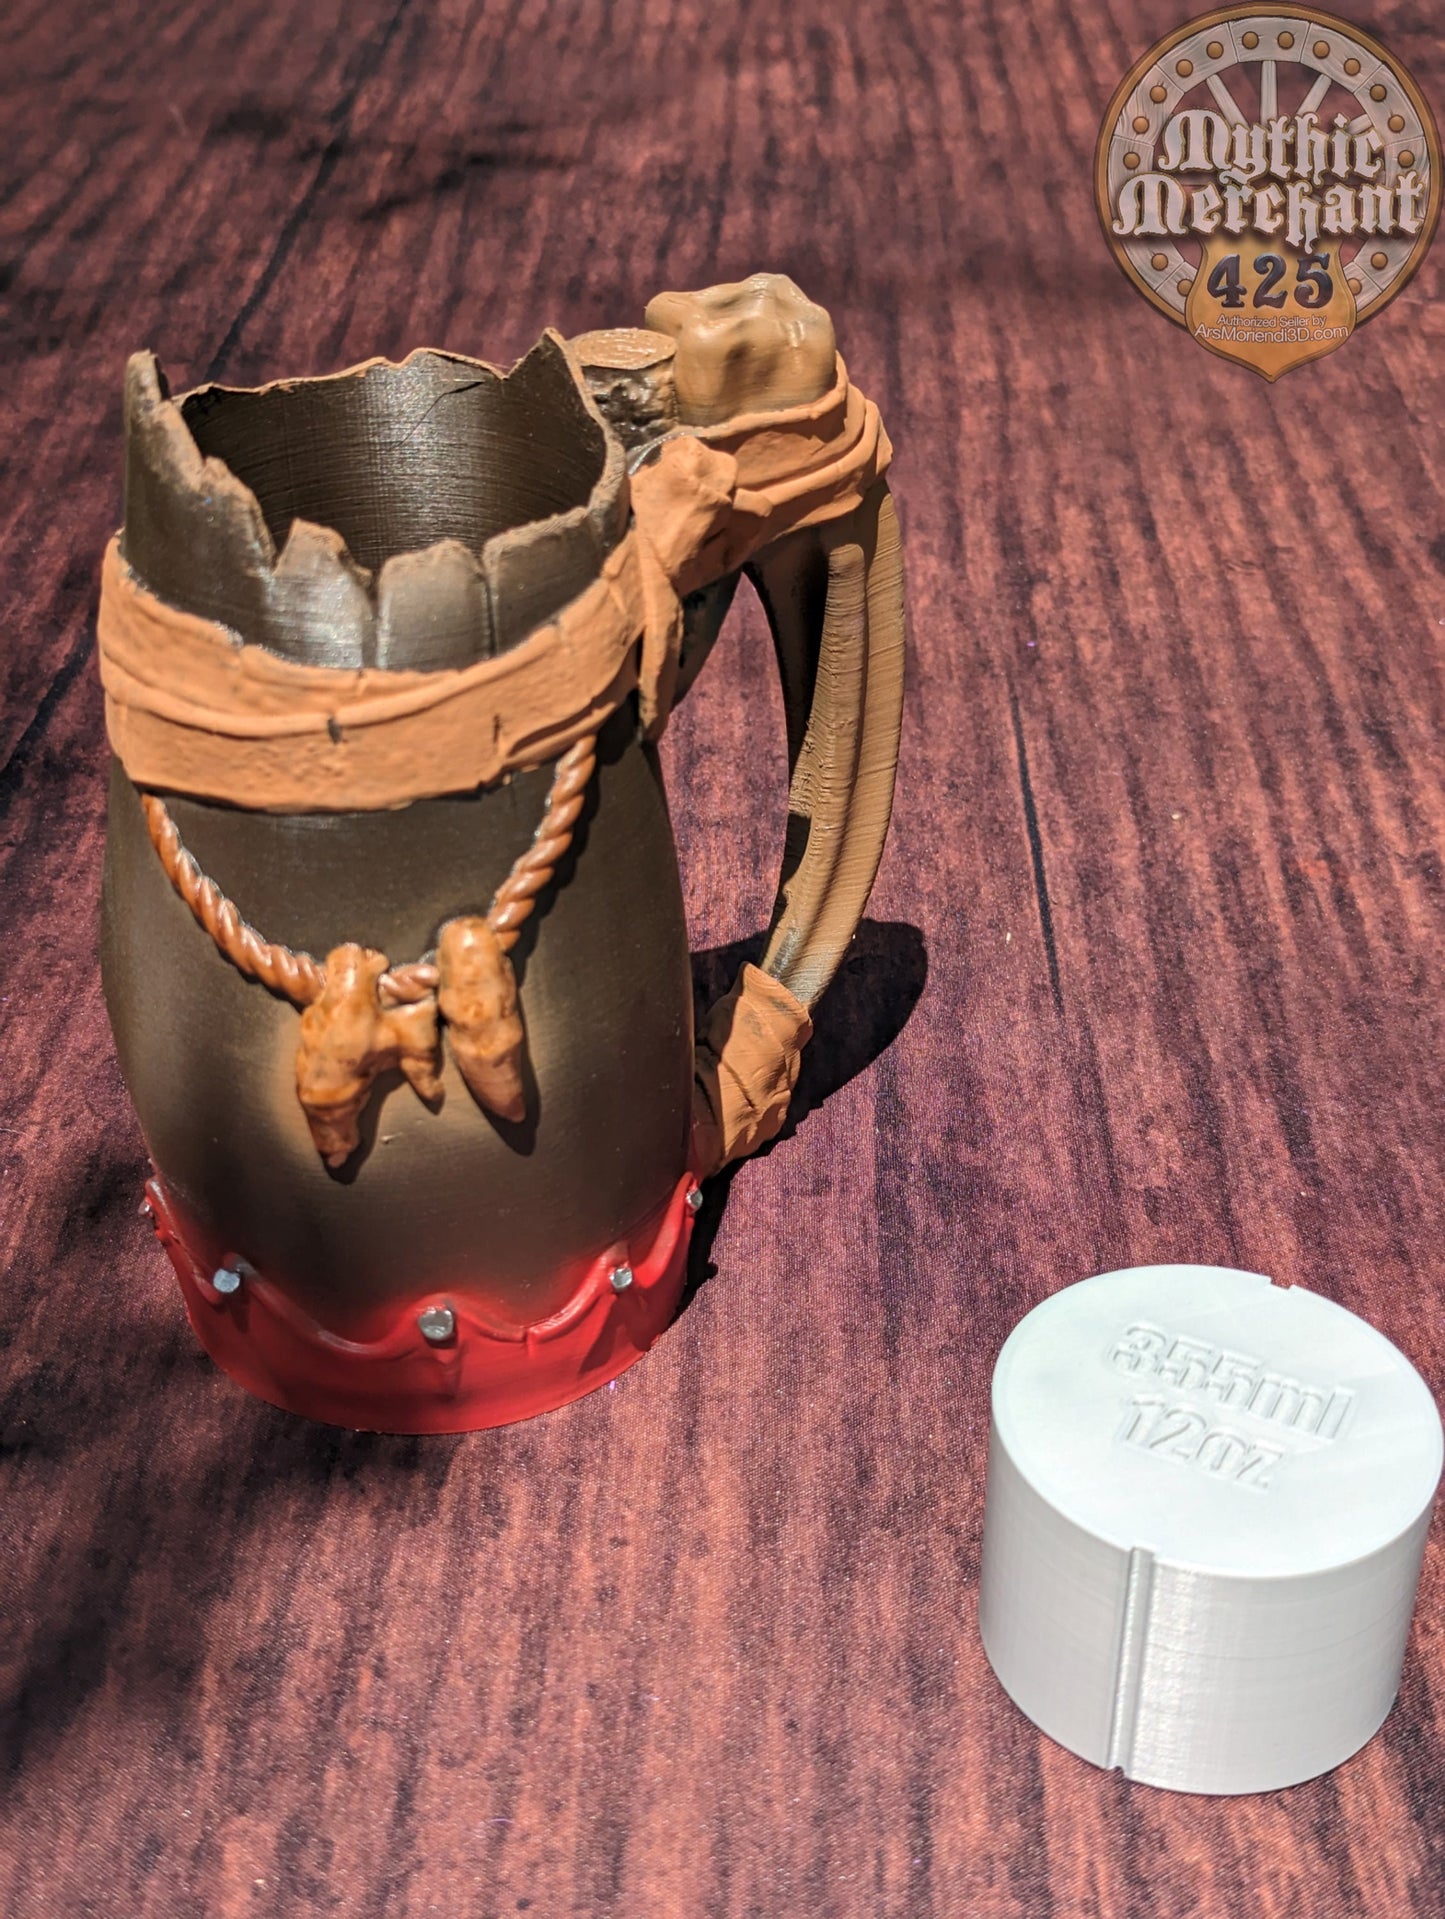 Barbarian Class 3D Printed Mythic Mug Stein | Tabletop RPG Gaming Cosplay - Dungeons and Dragon DnD D&D Wargaming | Drink Koozie Can Holder.